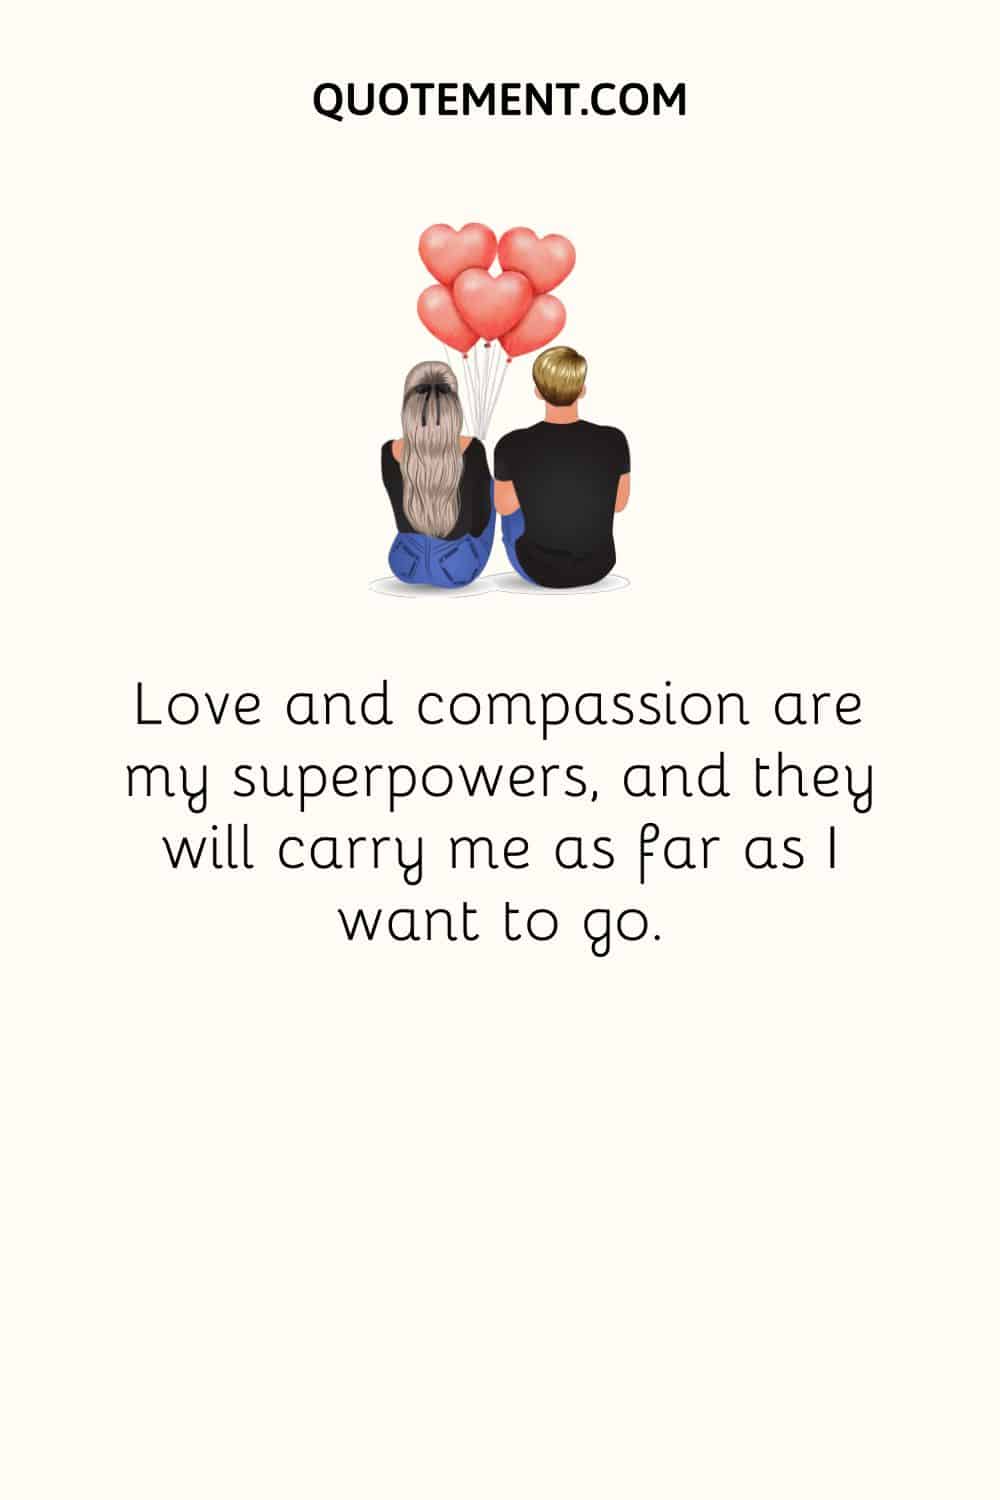 Love and compassion are my superpowers, and they will carry me as far as I want to go